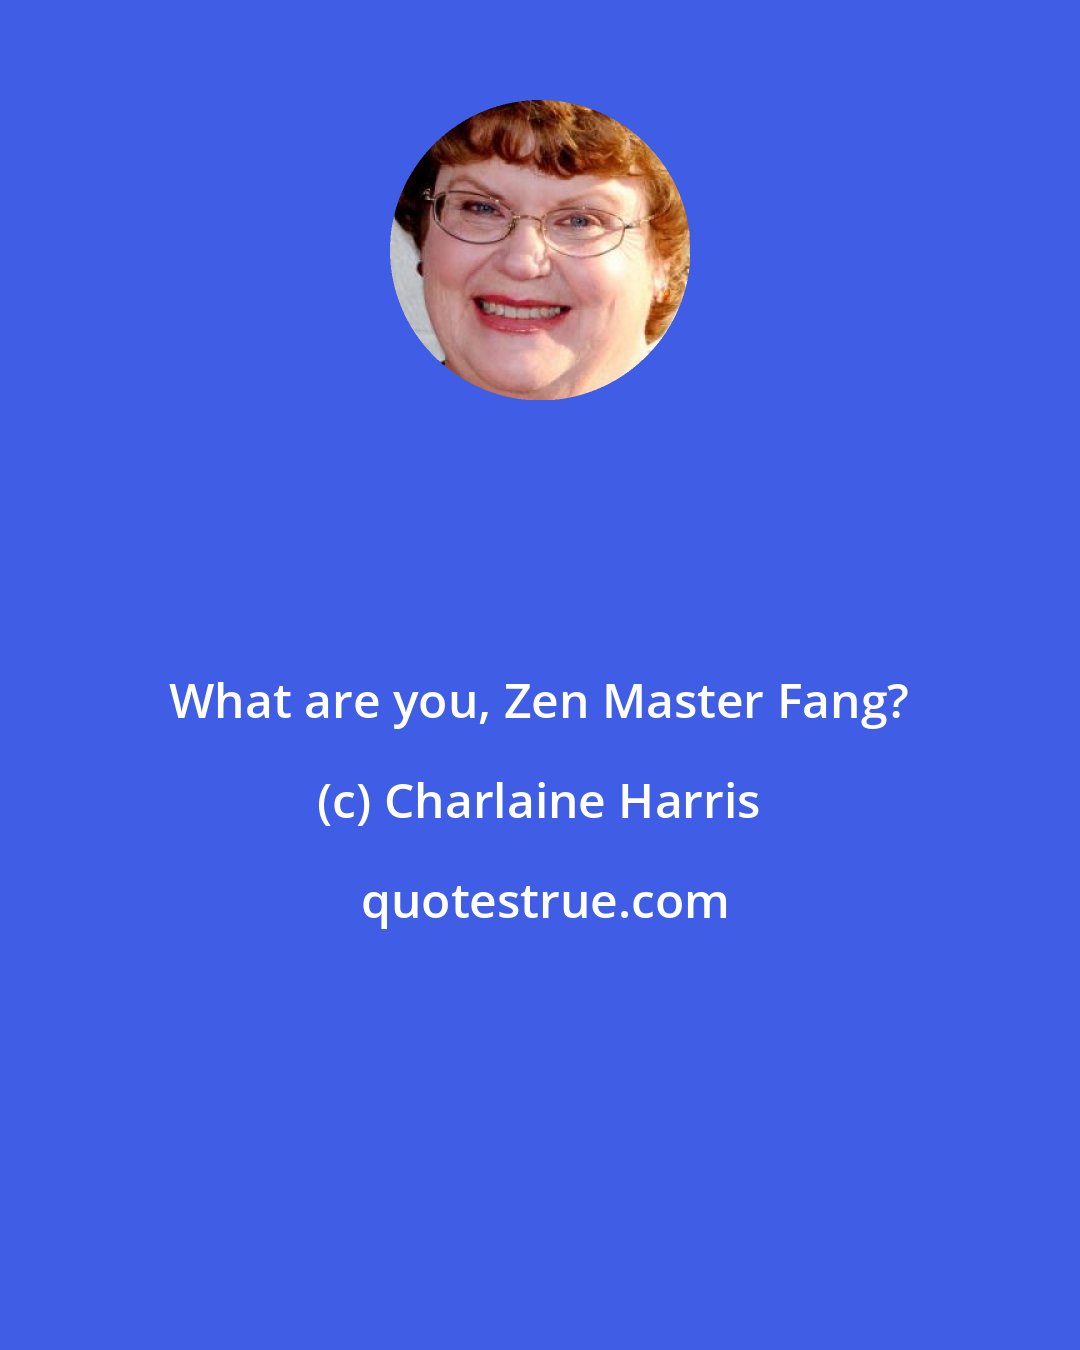 Charlaine Harris: What are you, Zen Master Fang?